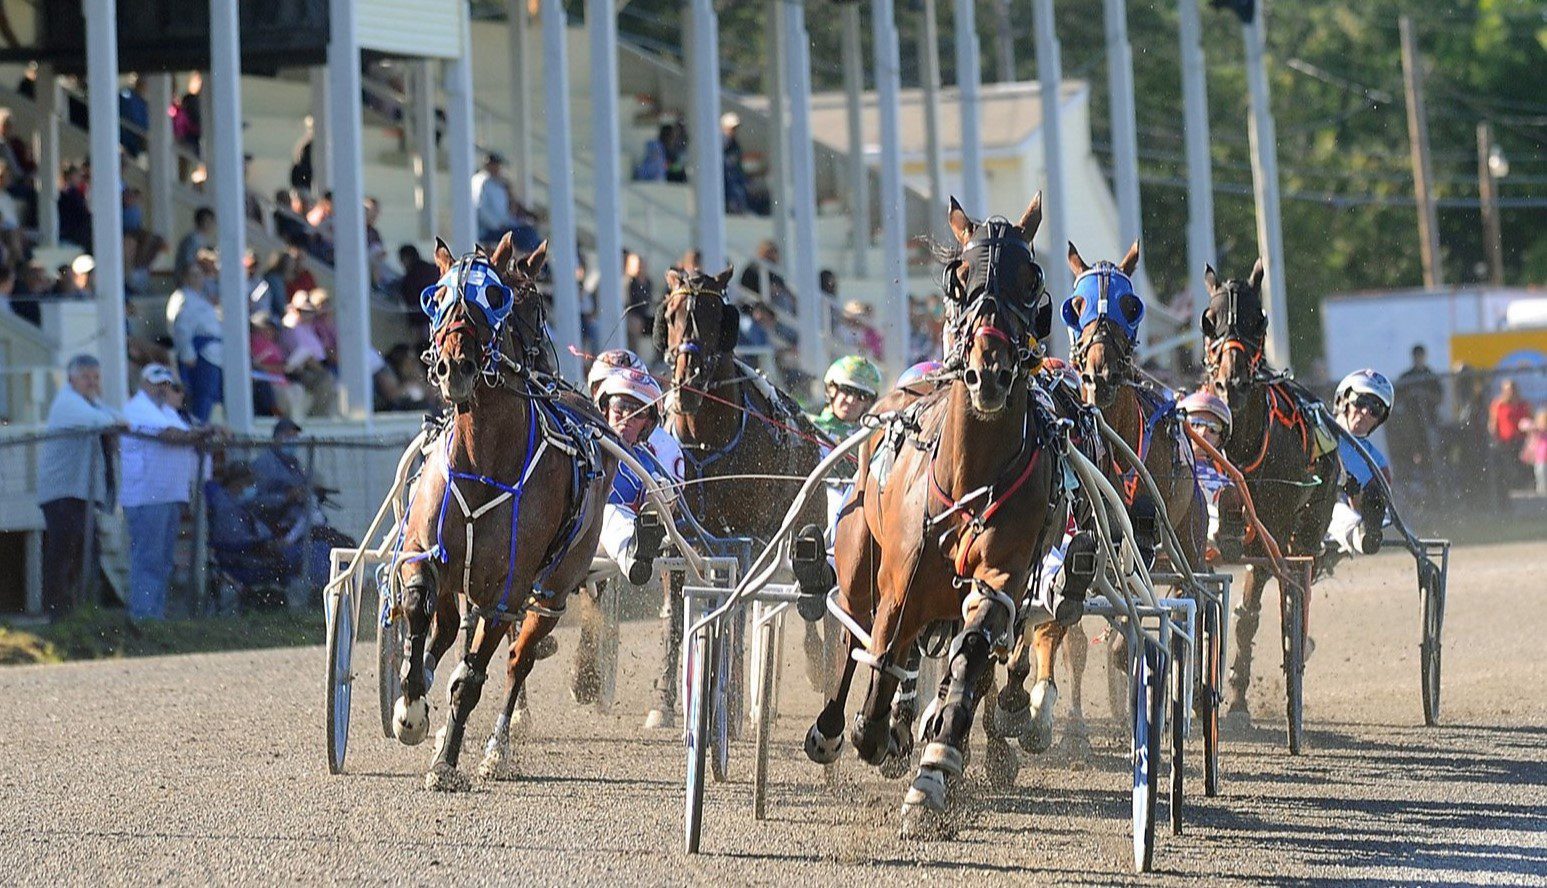 There’s an ugly side to Maine harness racing